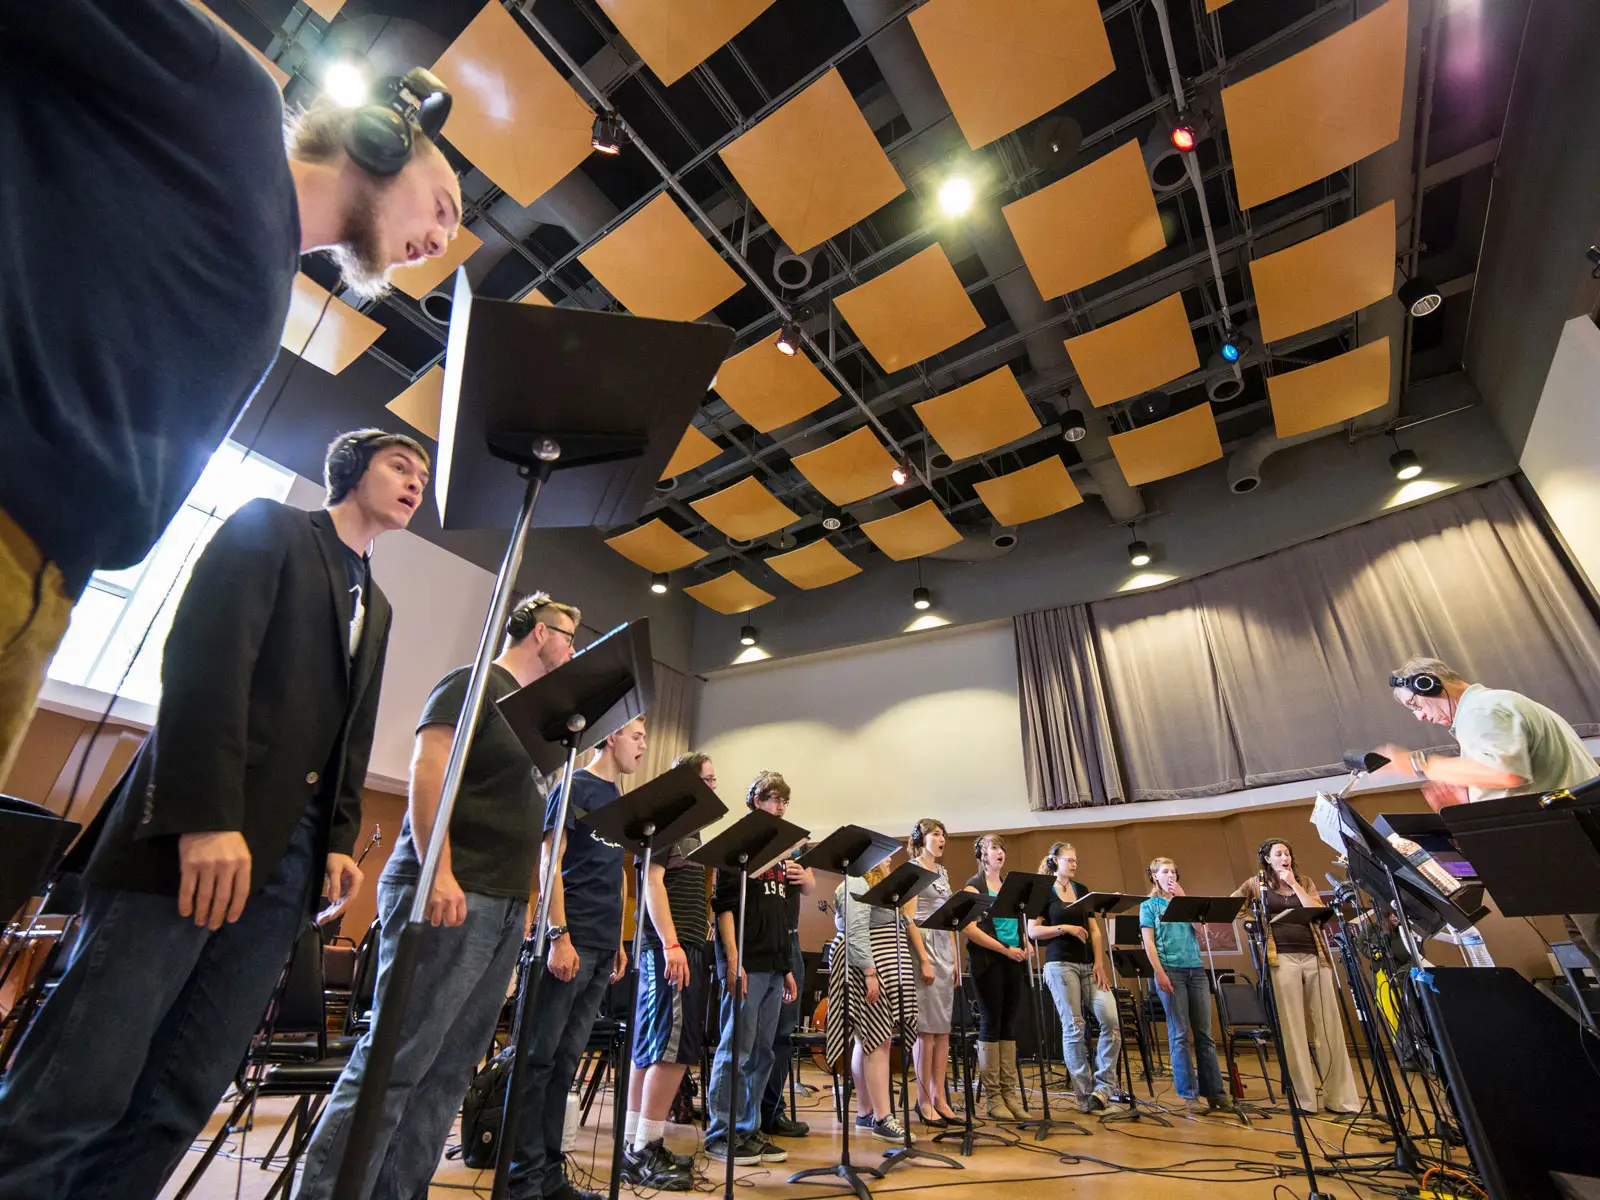 Singers in the recording hall with instructor and several music stands at the Niemery Center